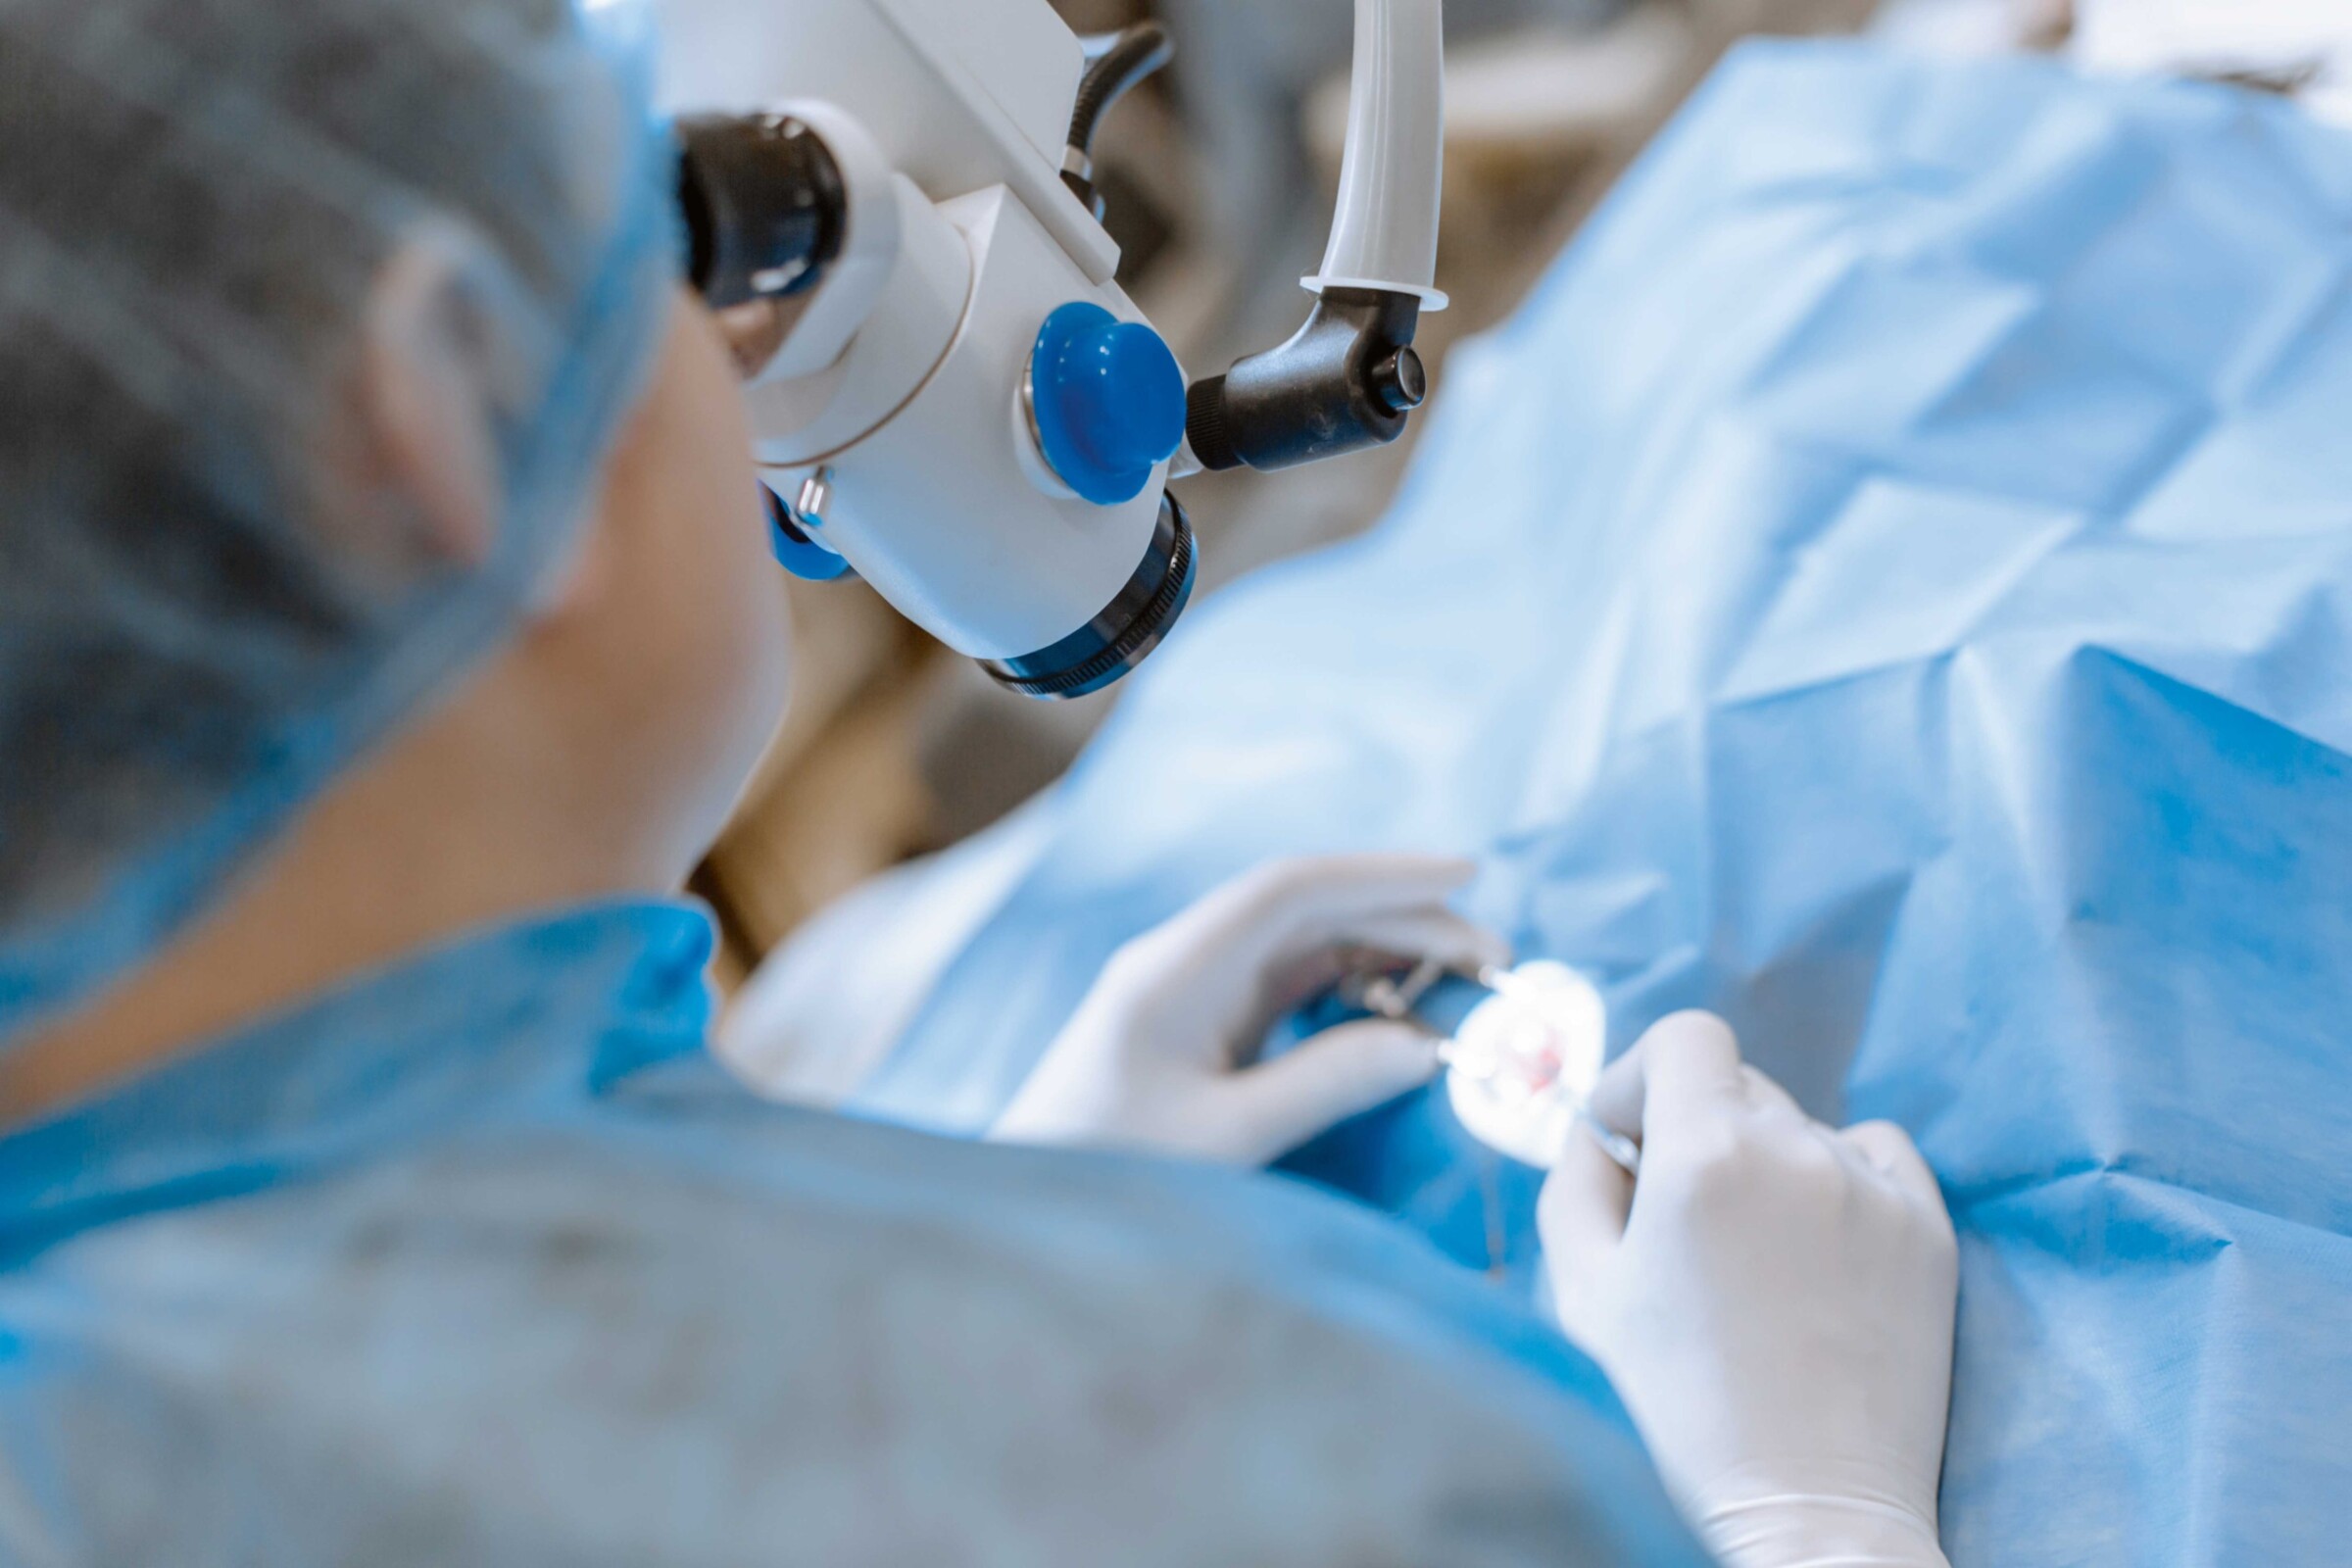 80% CHANCE OF THE ­SURGICAL INSTRUMENT FOR ­OPHTHALMIC SURGERY BEING EQUIPPED WITH A PART MANUFACTURED BY JPT